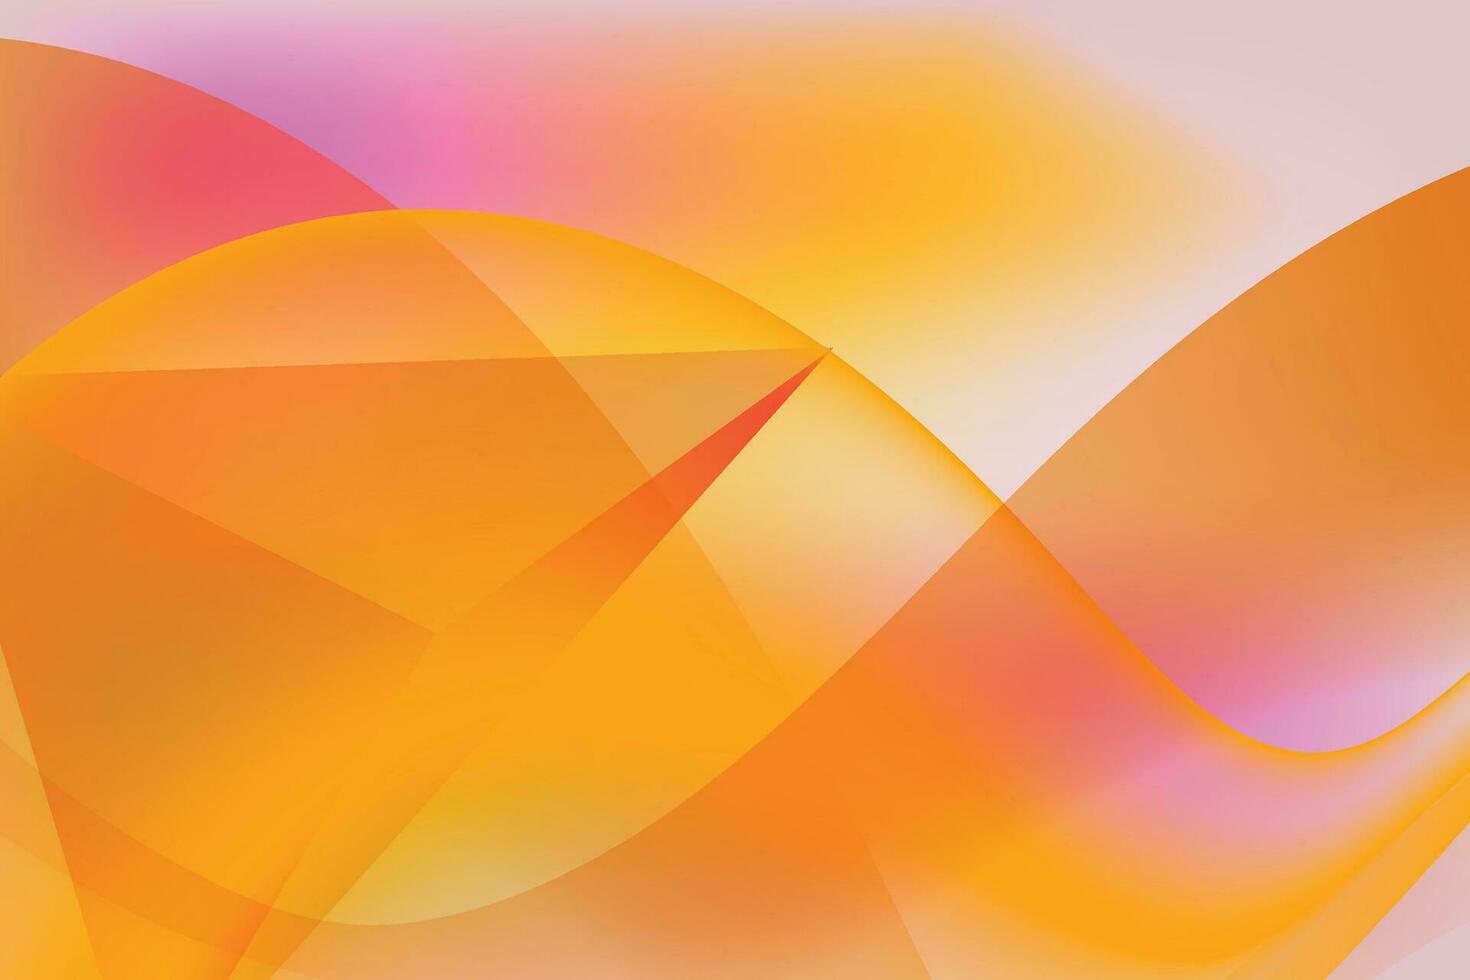 Orange cool sweet colorful abstract simple geometric shapes creative smooth simple background vector